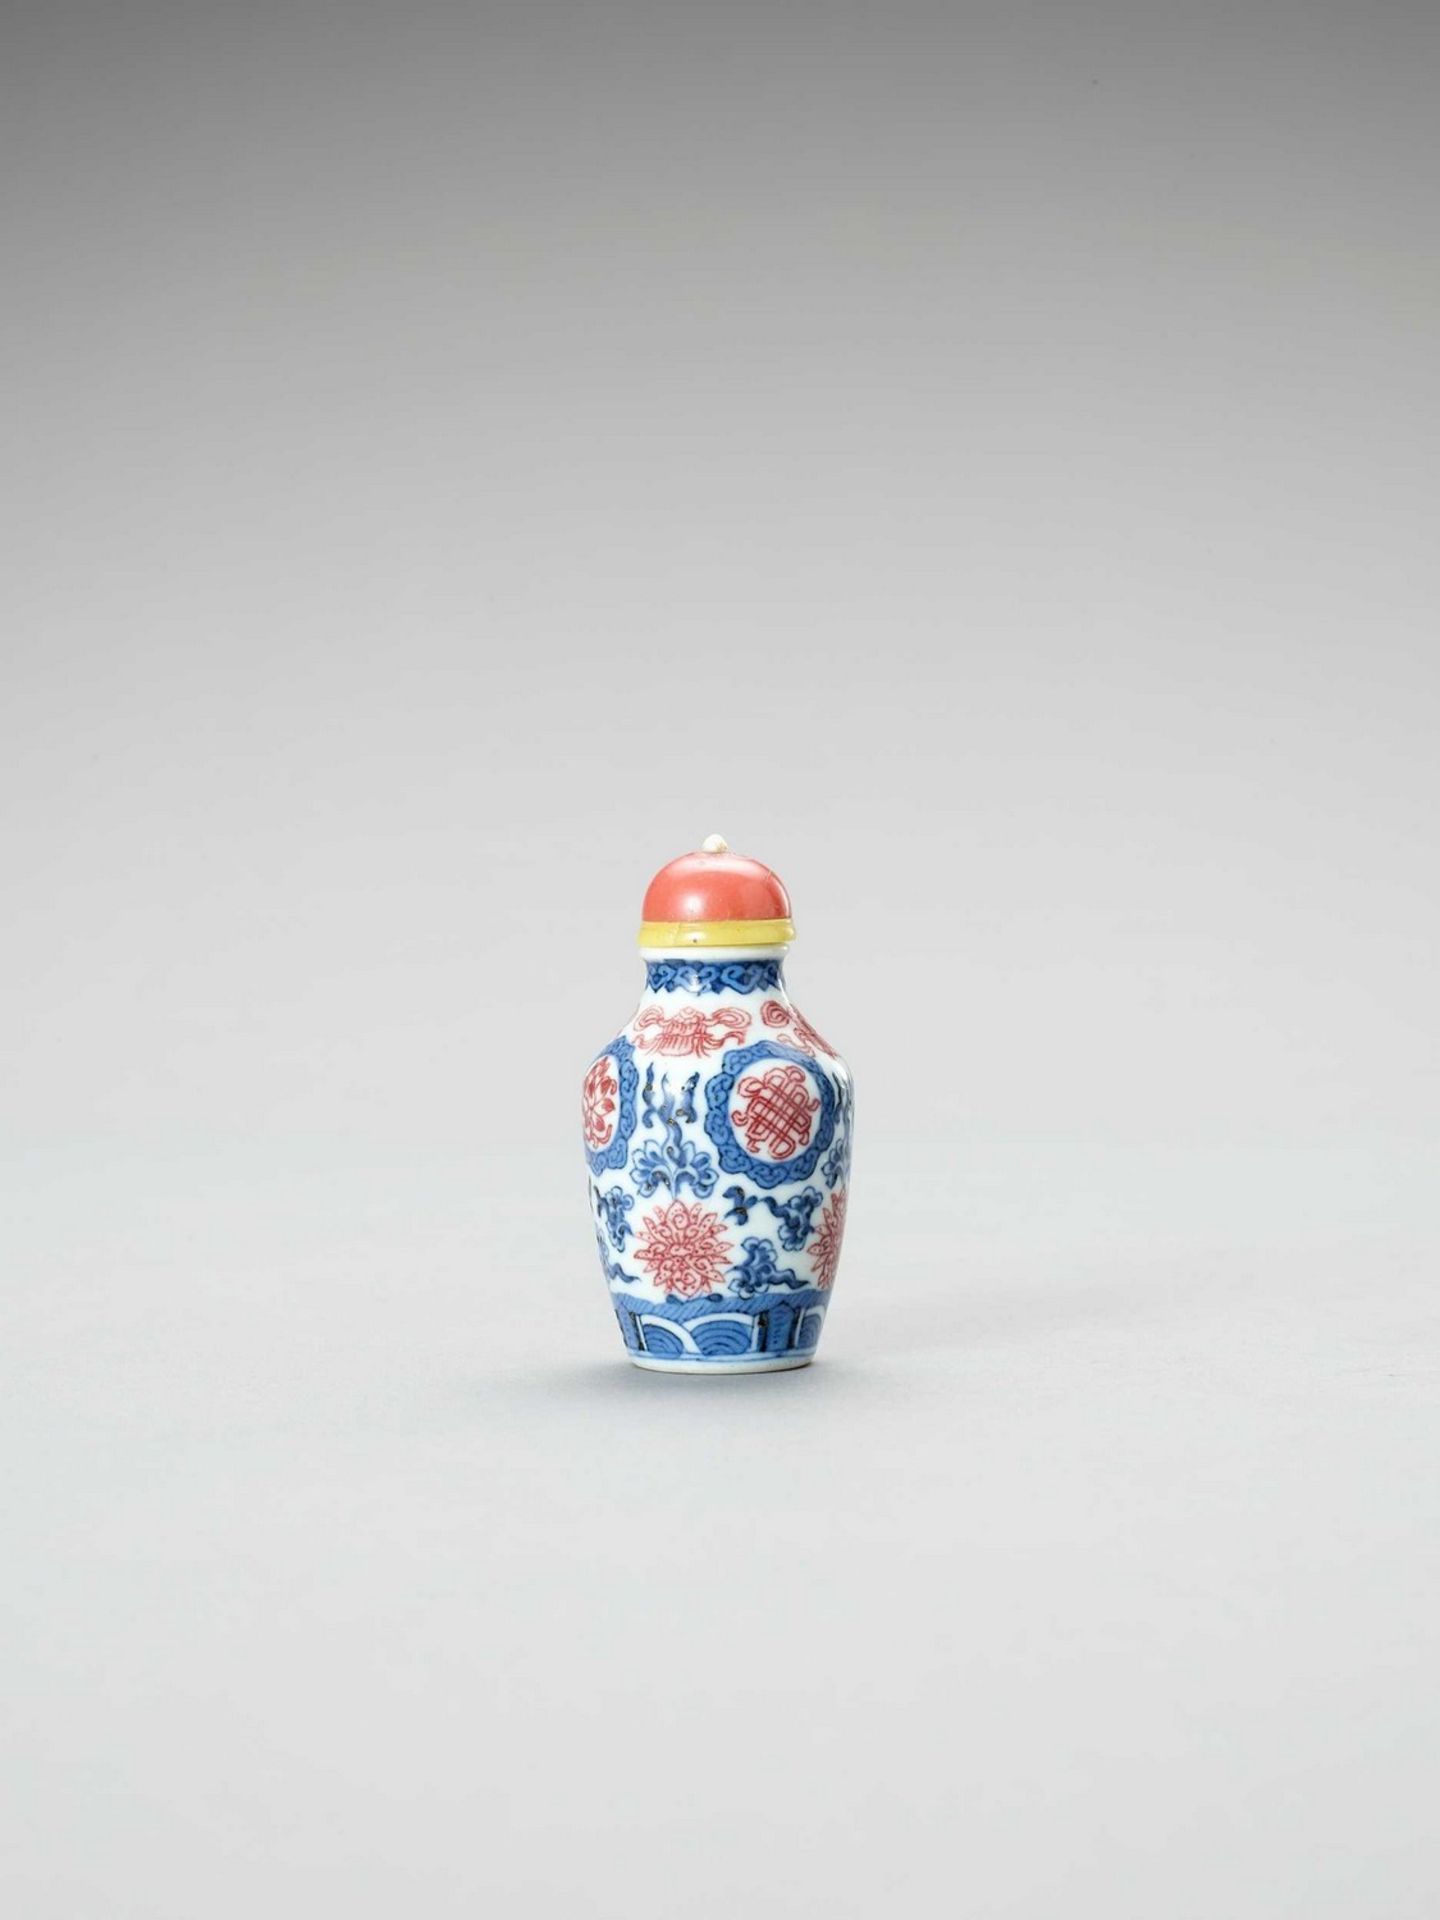 AN IRON-RED, BLUE AND WHITE PORCELAIN SNUFF BOTTLE - Image 2 of 6